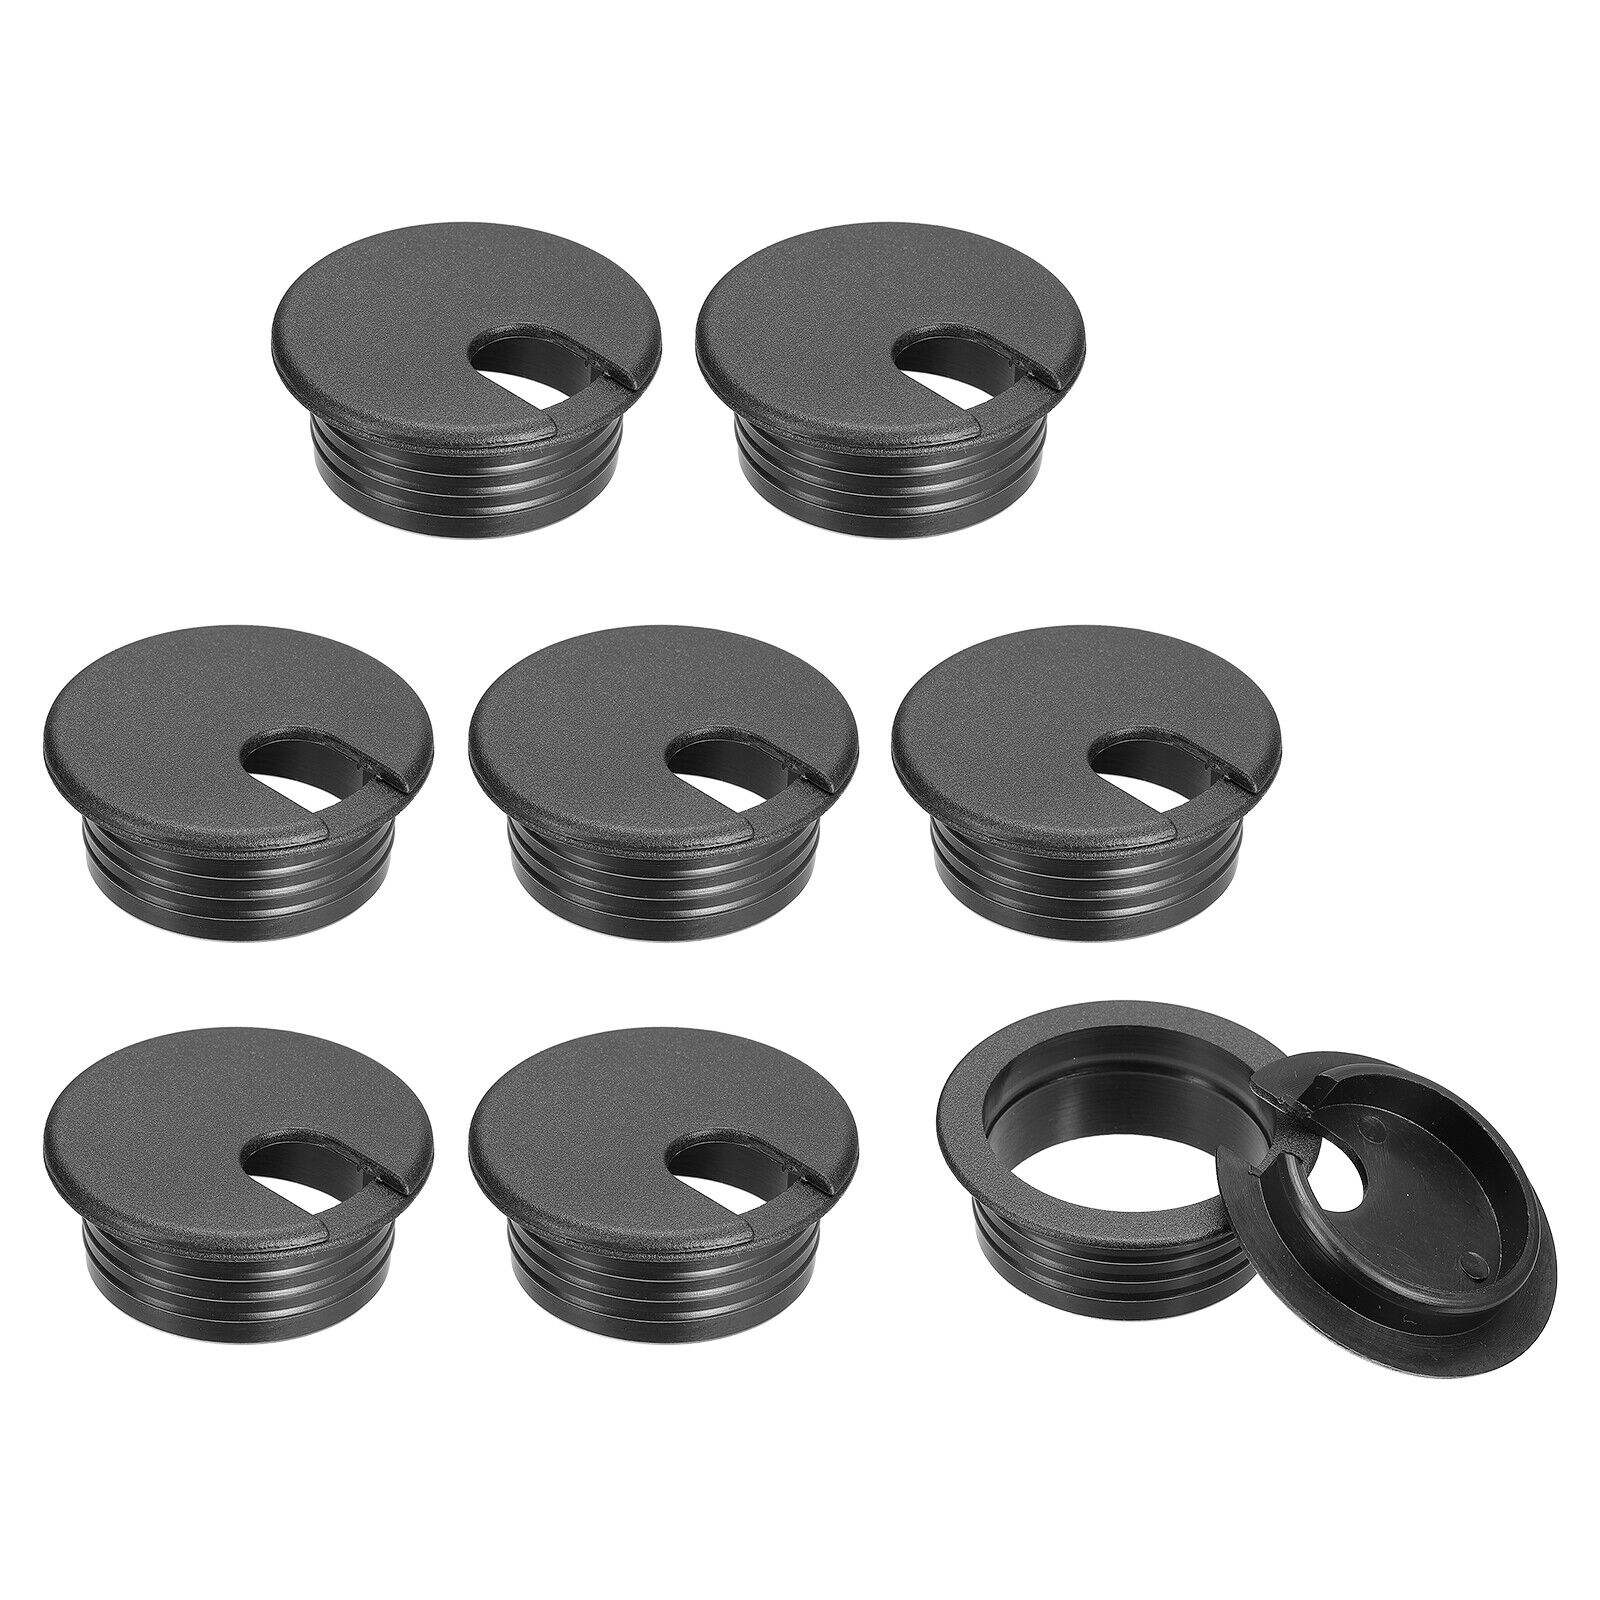 8Pcs 38mm Cable Hole Cover ABS Desk Cable Wire Cord Grommet for Wire Organizer